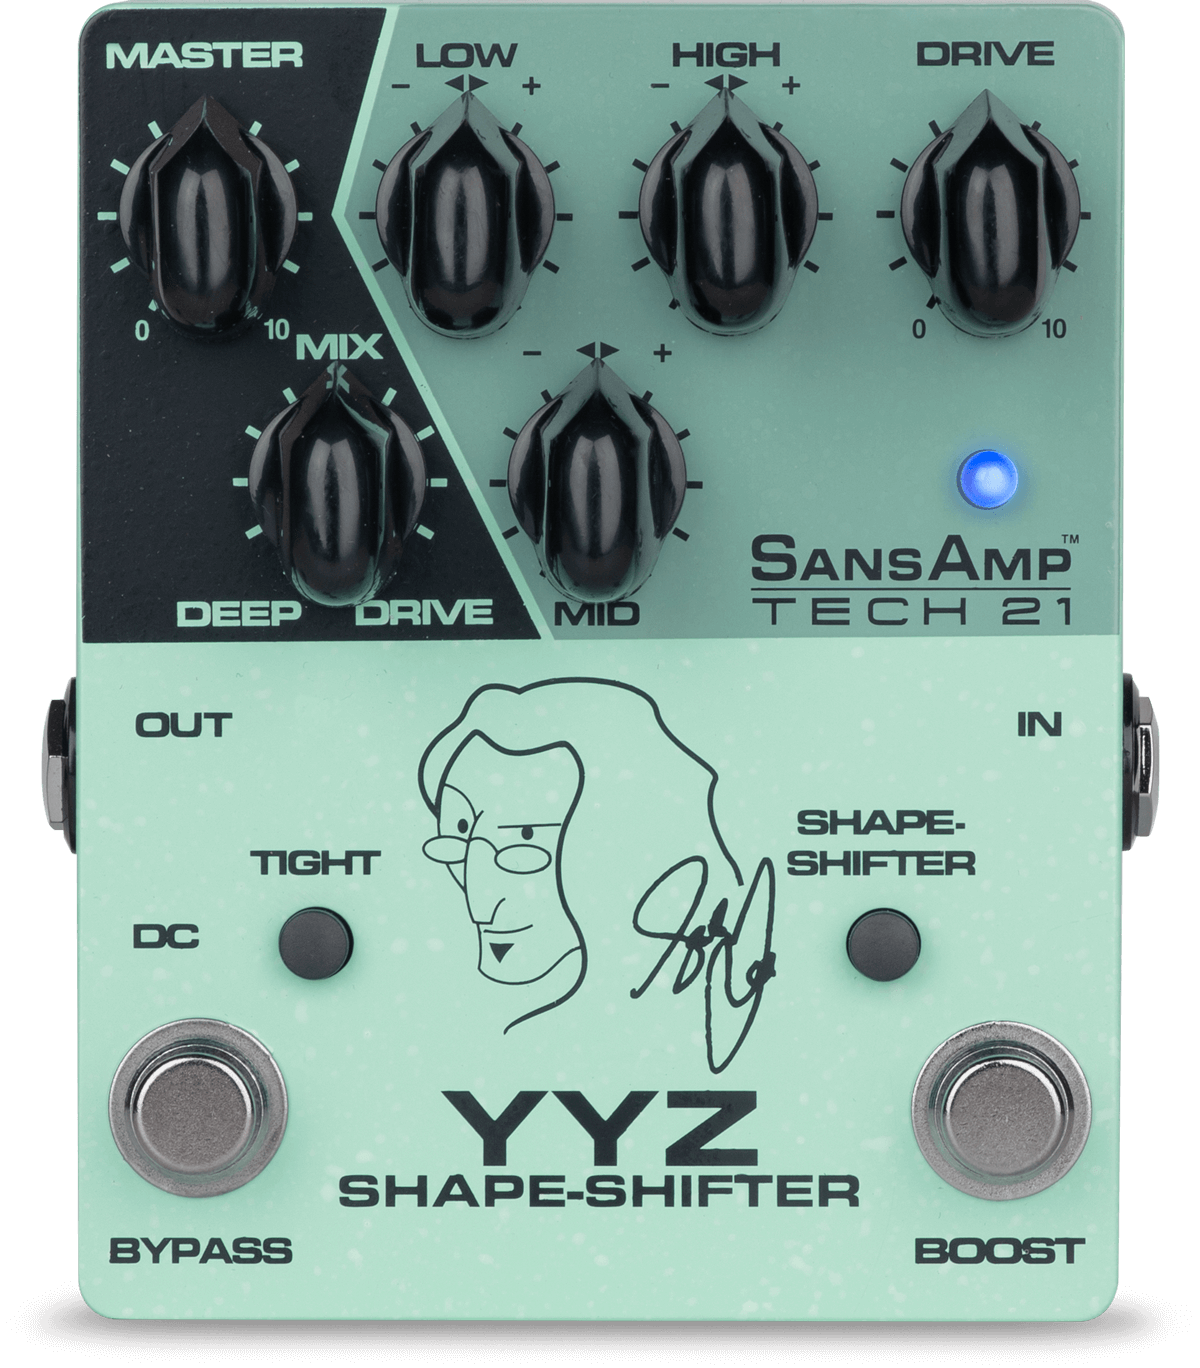 Tech 21 product image of the Geddy Lee YYZ Shape-shifter Signature SansAmp pedal